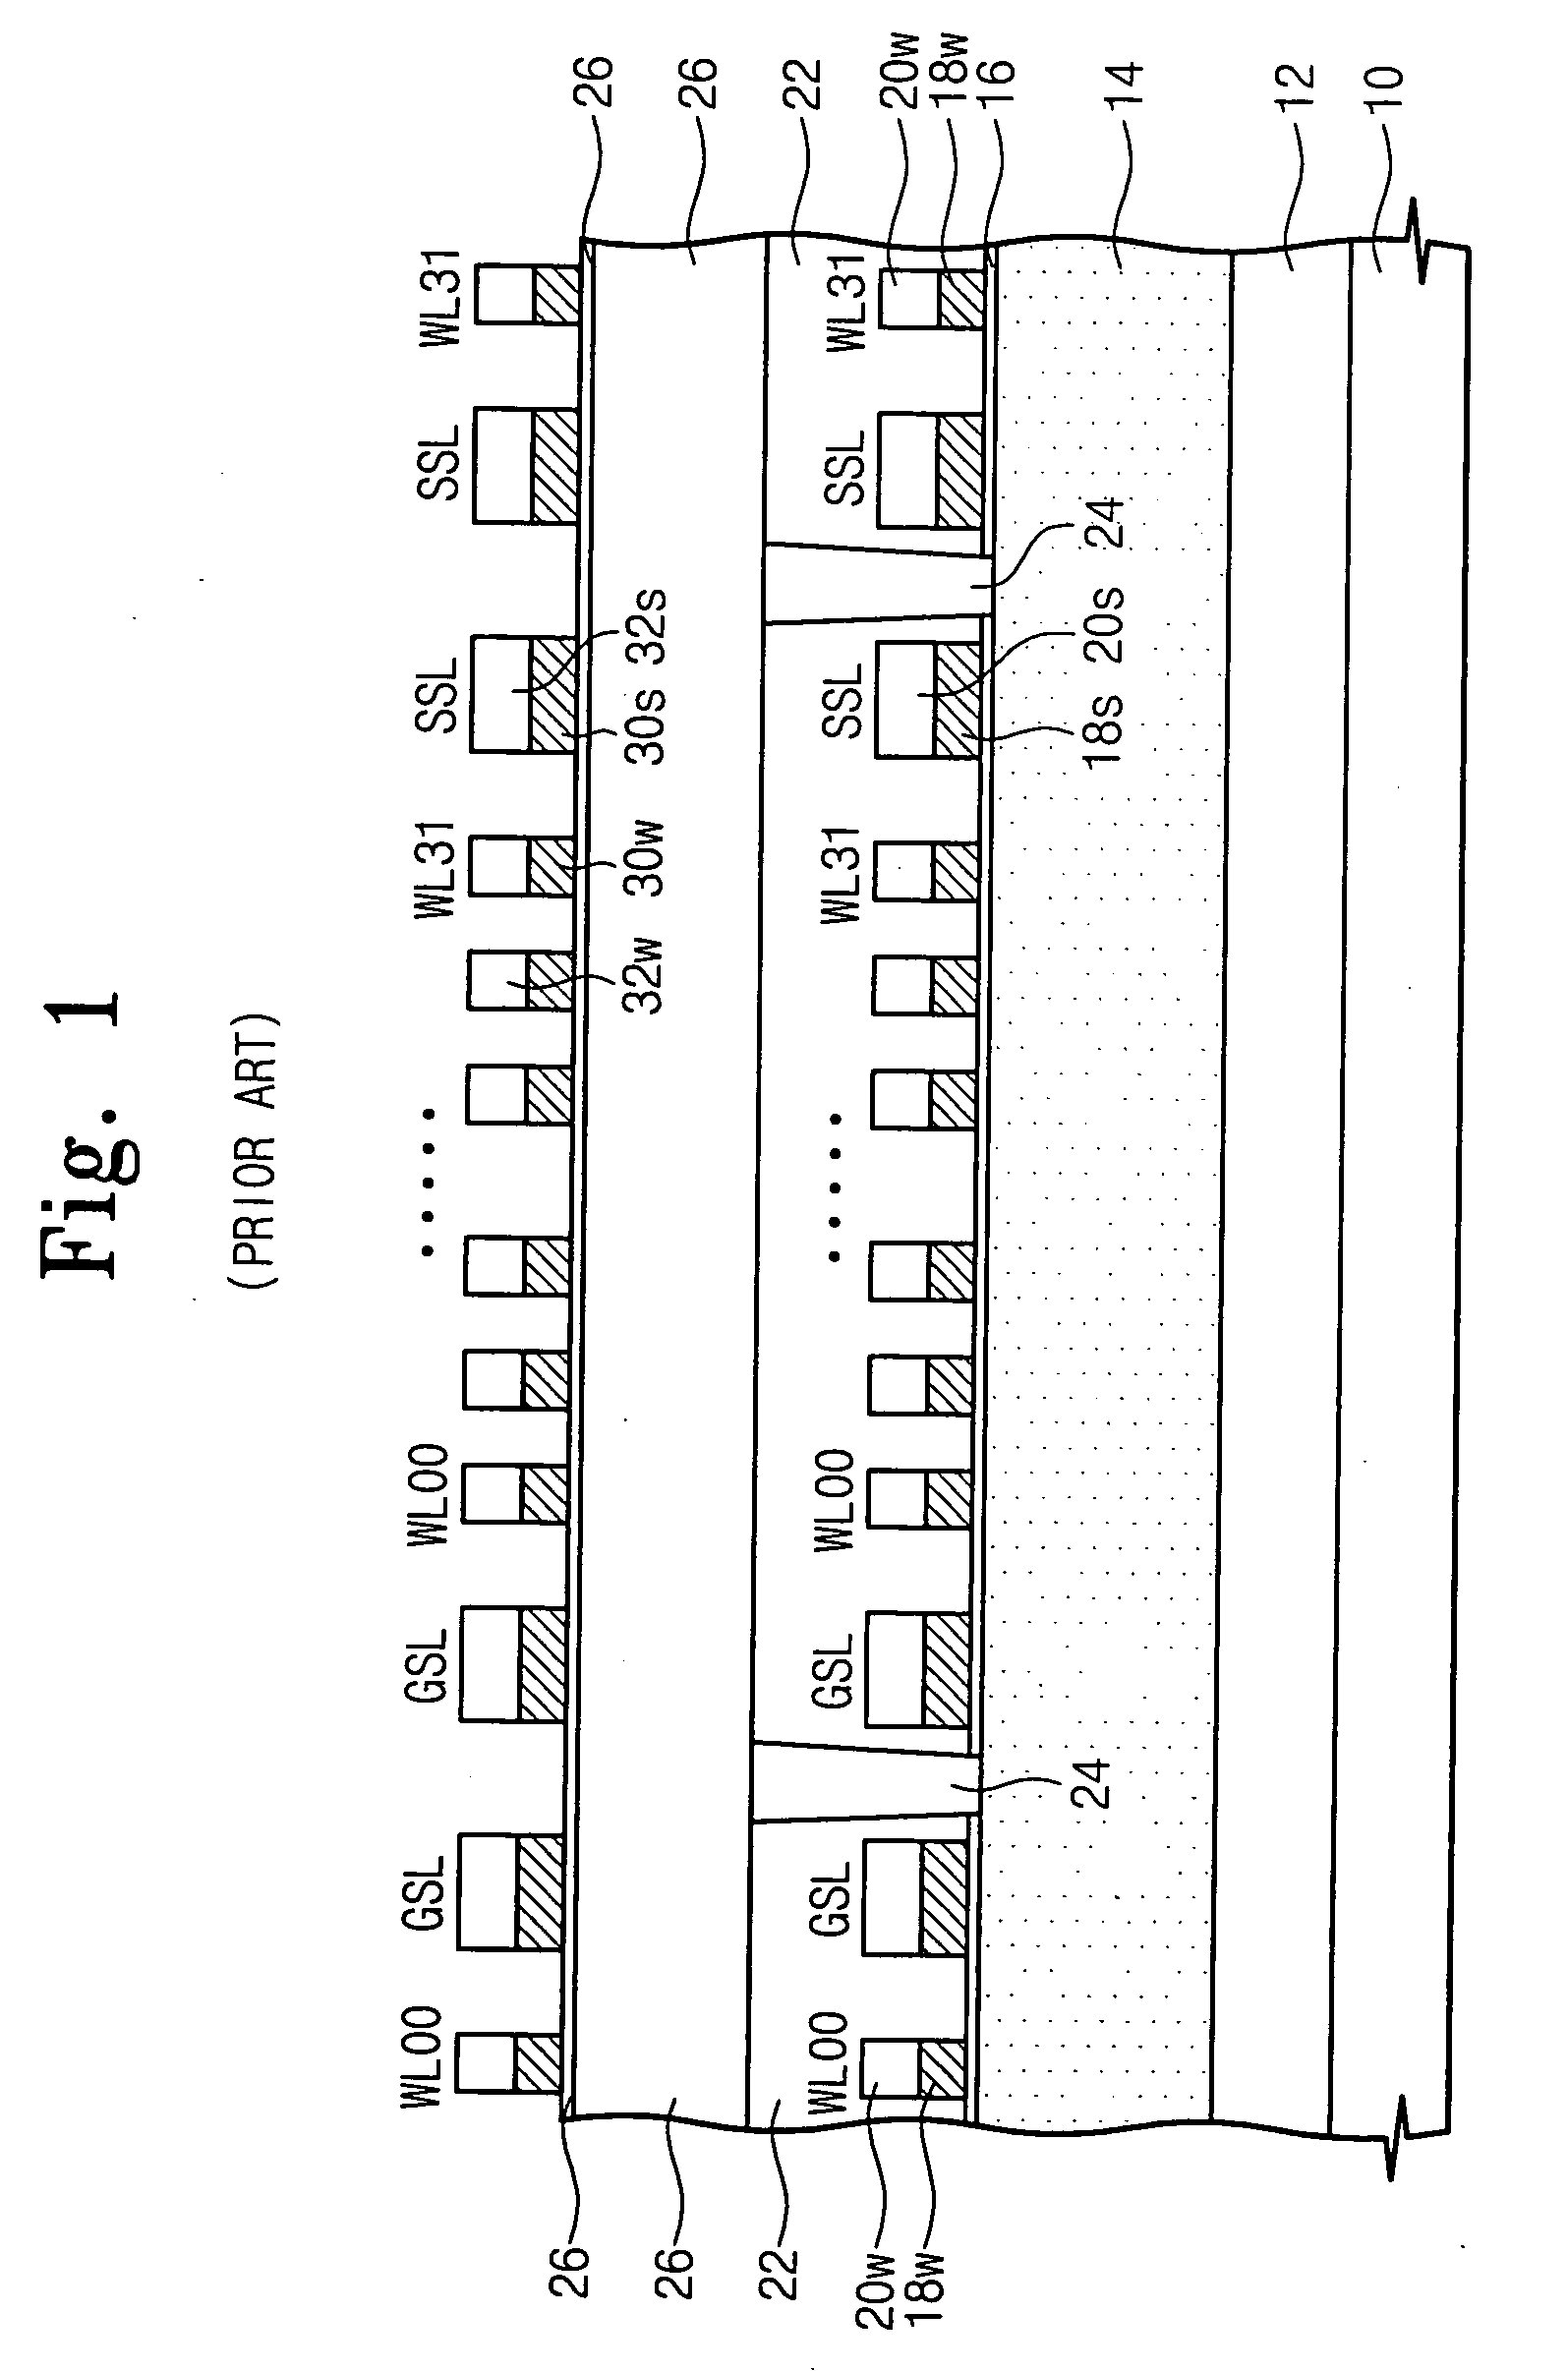 Multi-layer nonvolatile memory devices and methods of fabricating the same